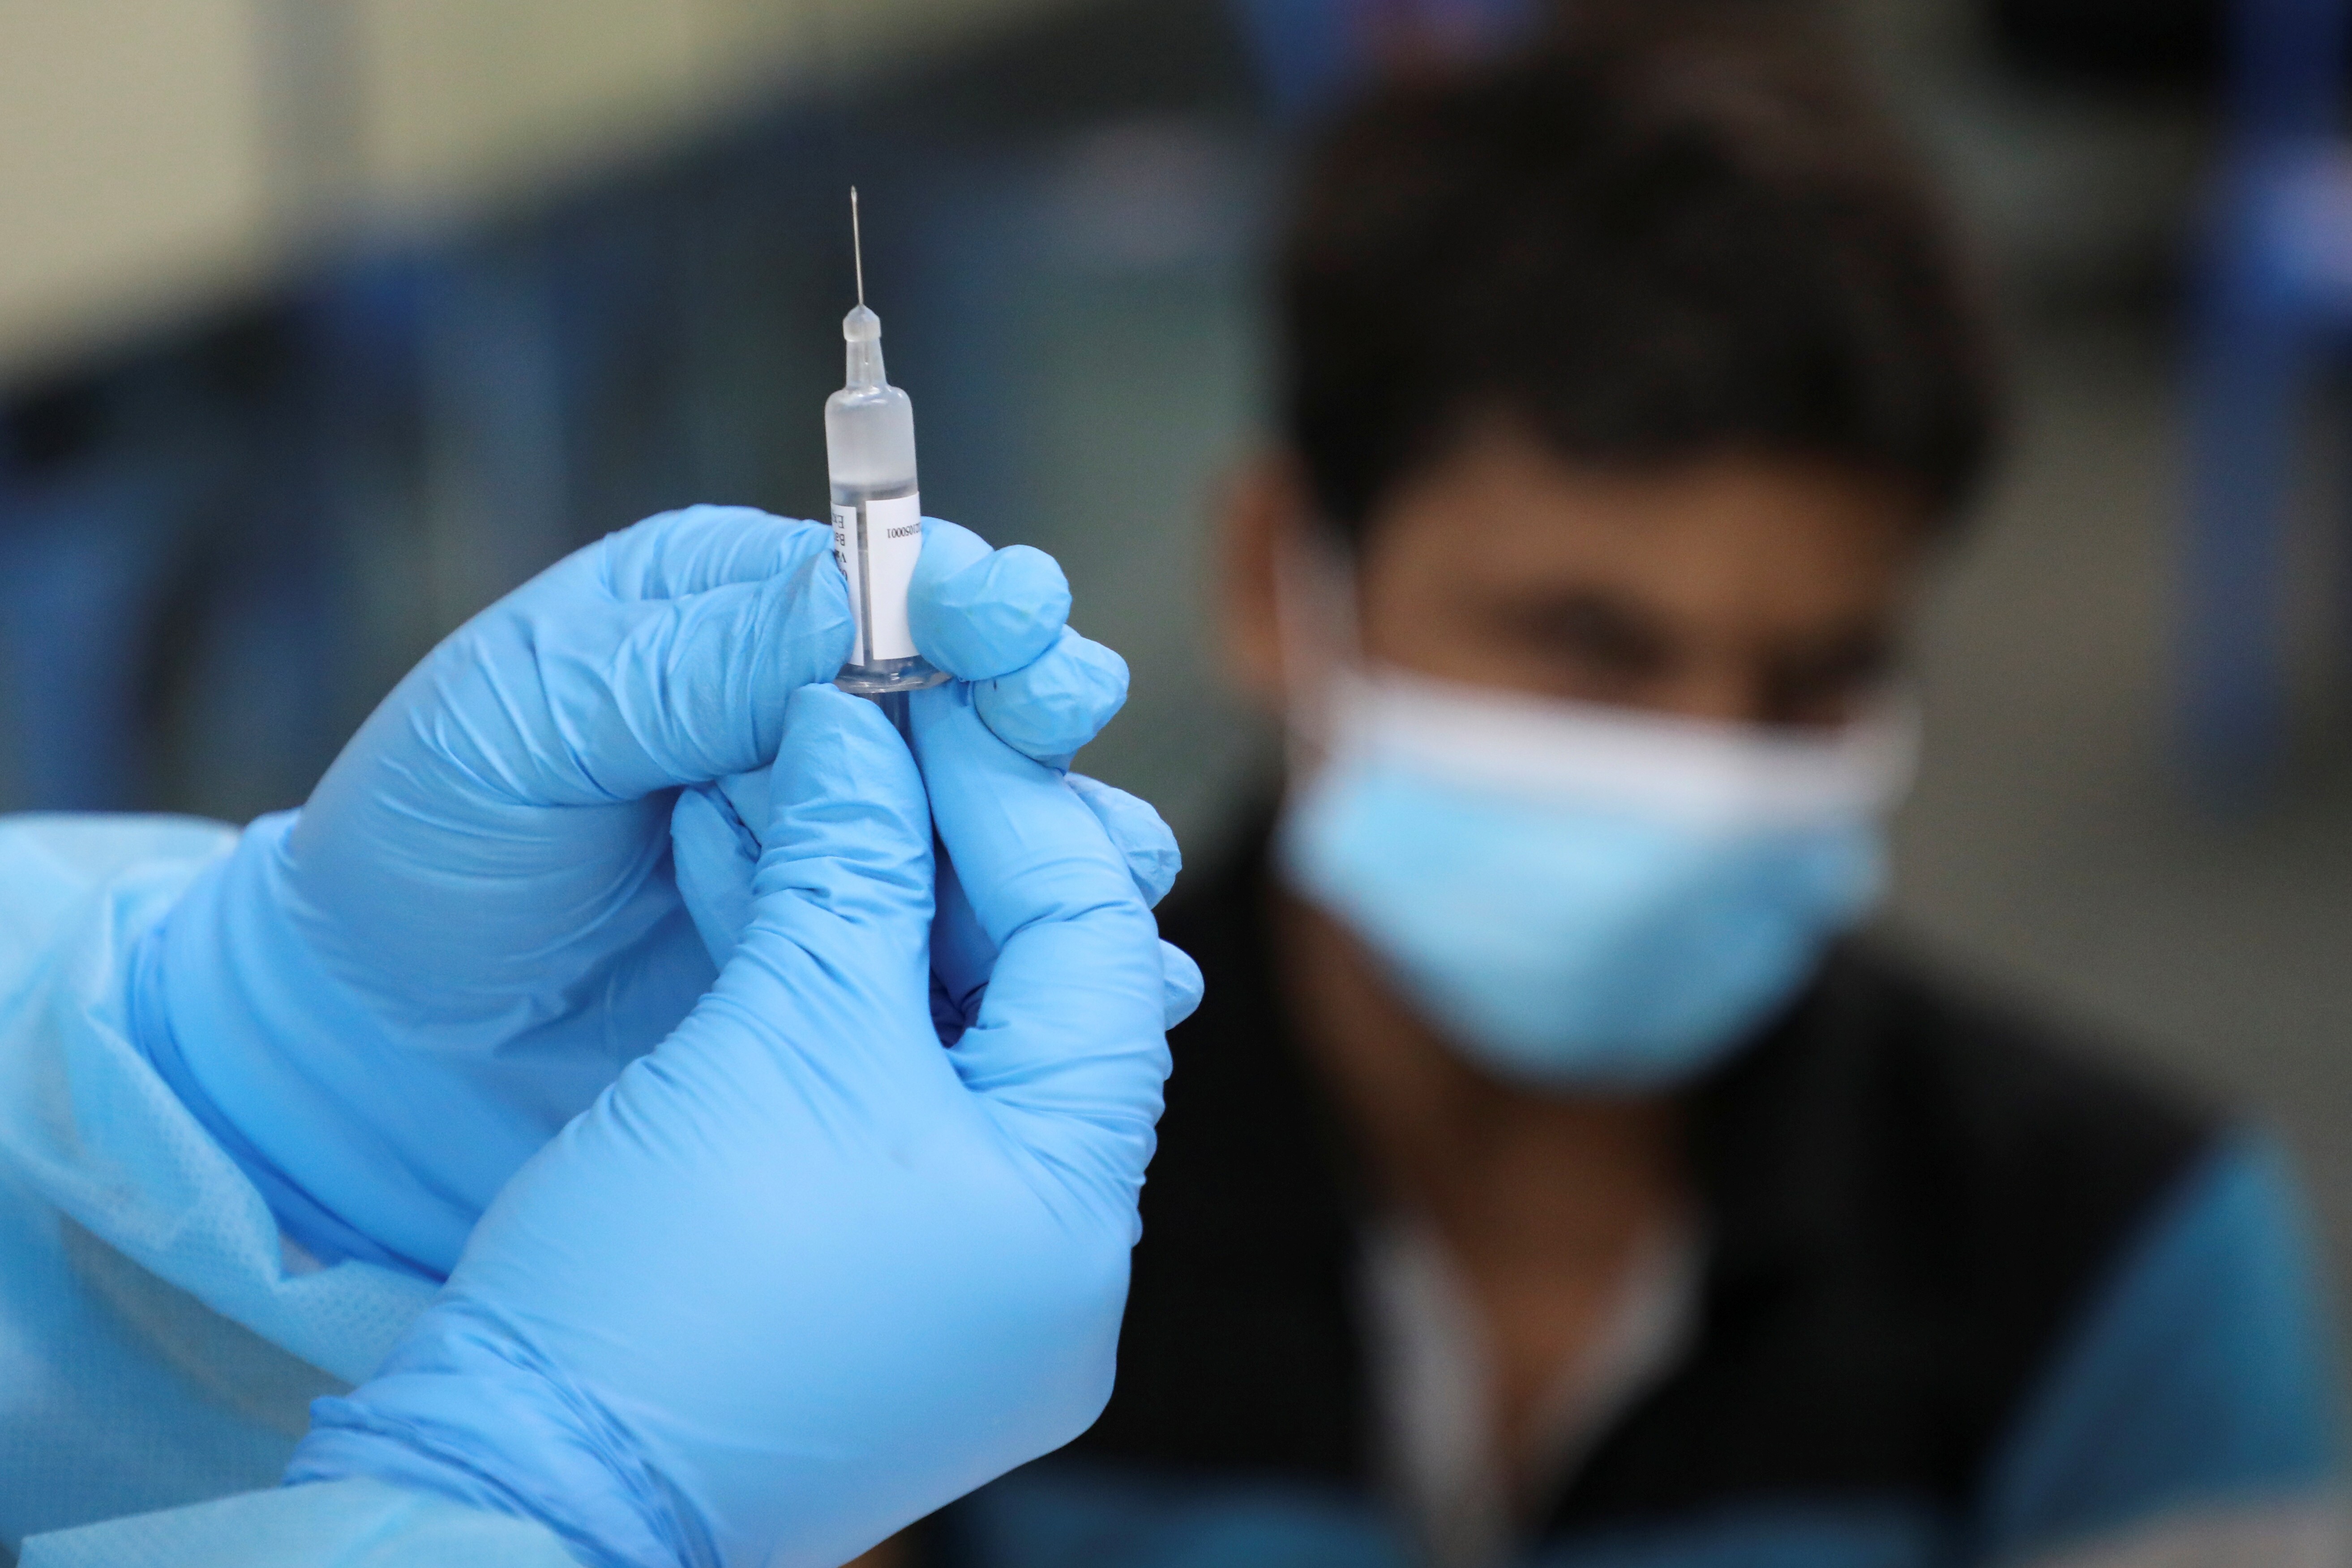 A medical worker prepares a coronavirus vaccine shot. More than 14 million doses have been administered in Malaysia since February, with 14 per cent of the population now fully vaccinated. Photo: Reuters